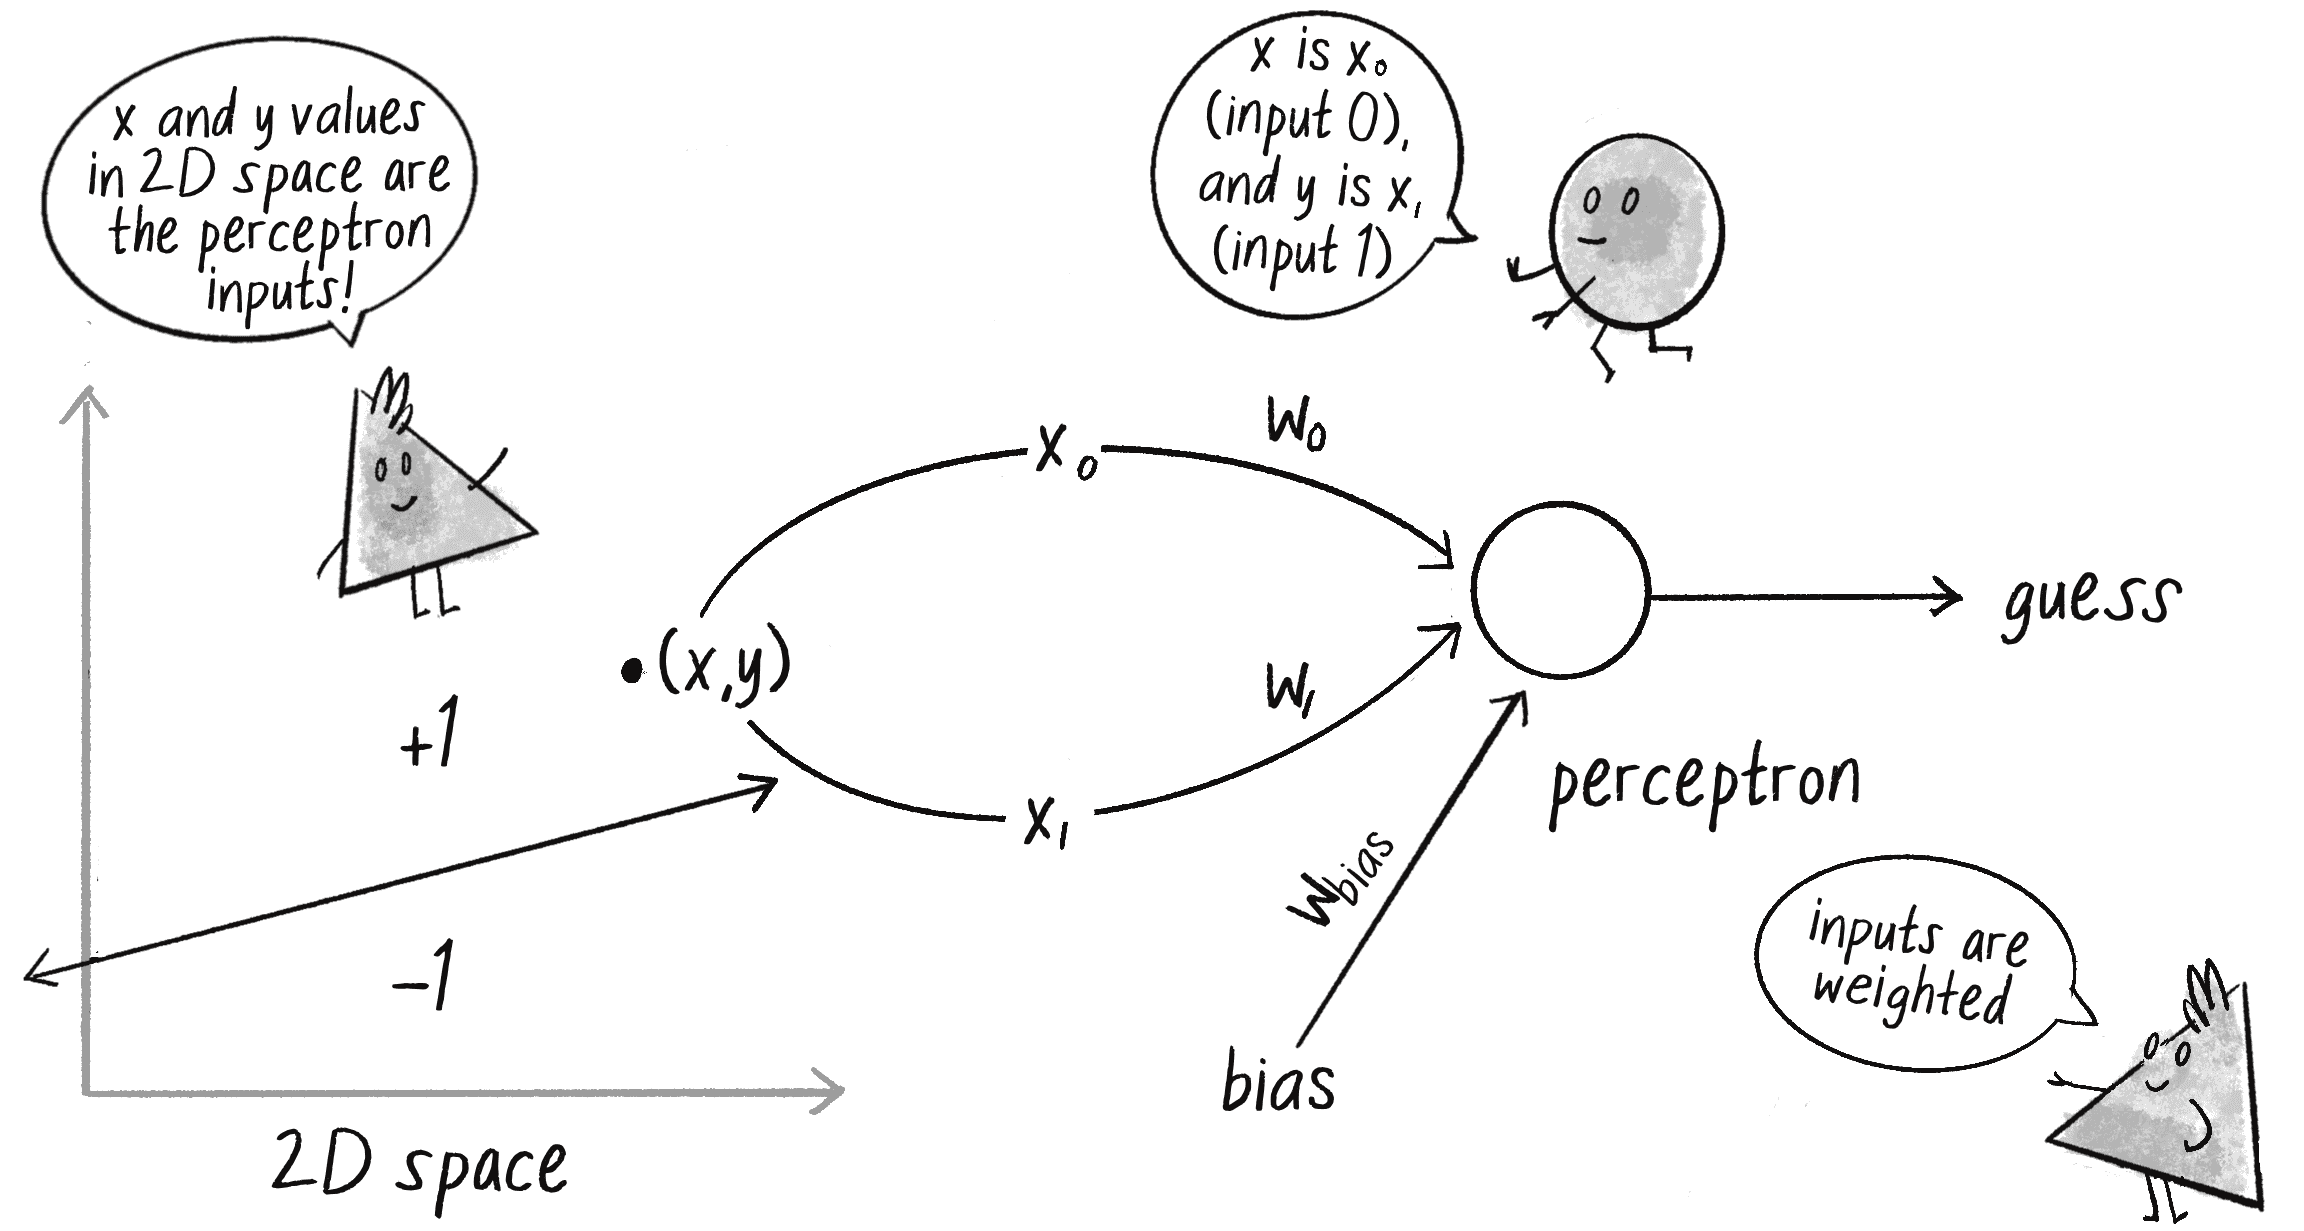 Figure 10.7: An (x, y) coordinate from the 2D space is the input to the perceptron. 